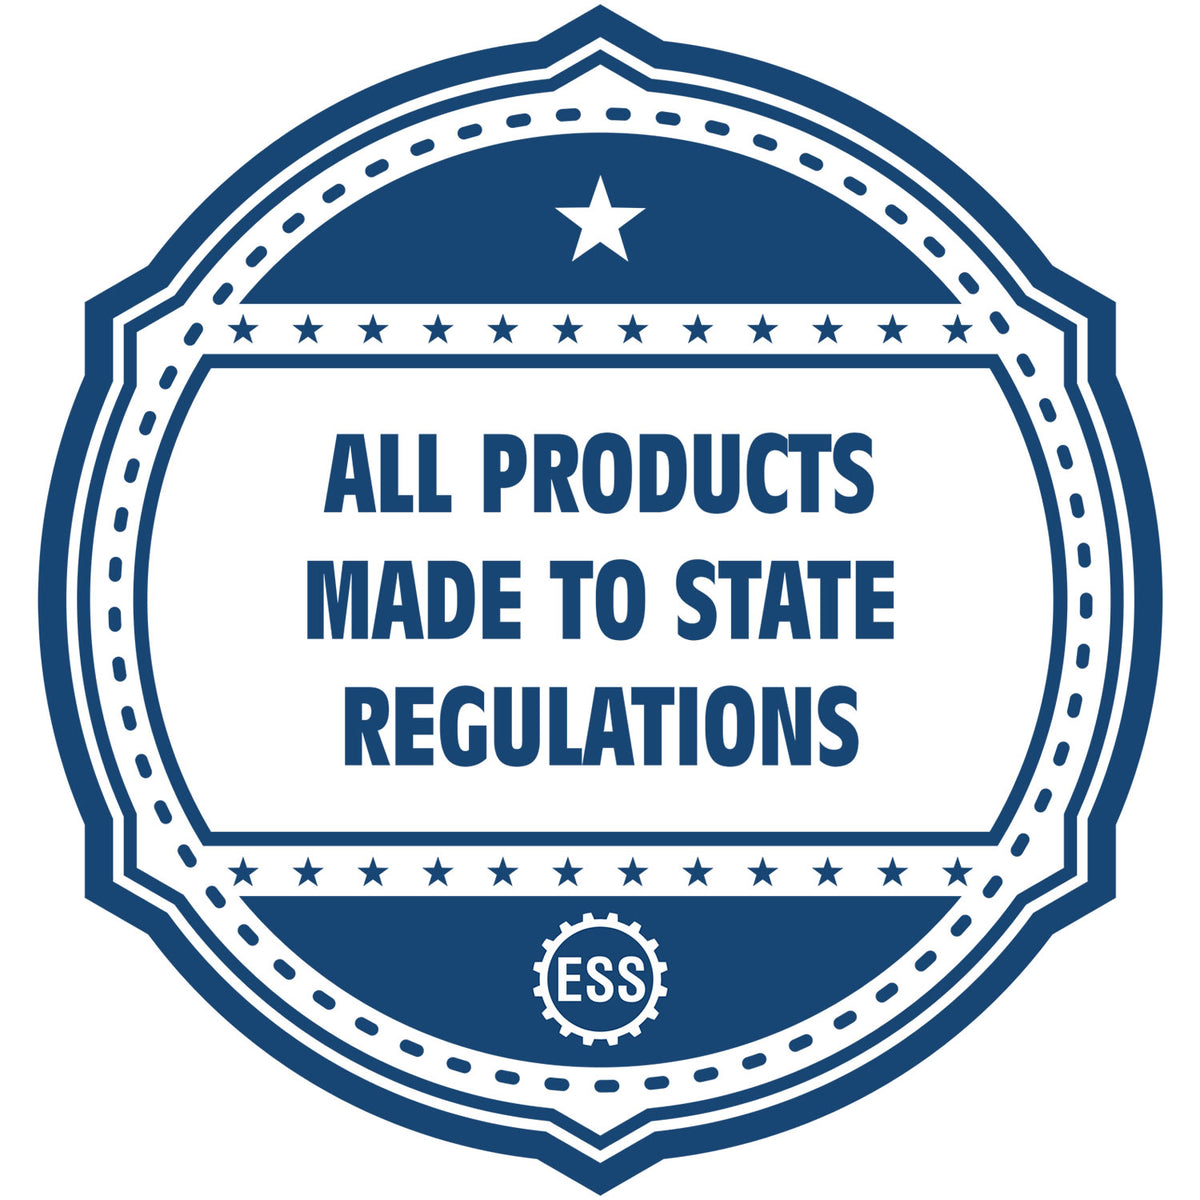 An icon or badge element for the Maryland Desk Surveyor Seal Embosser showing that this product is made in compliance with state regulations.